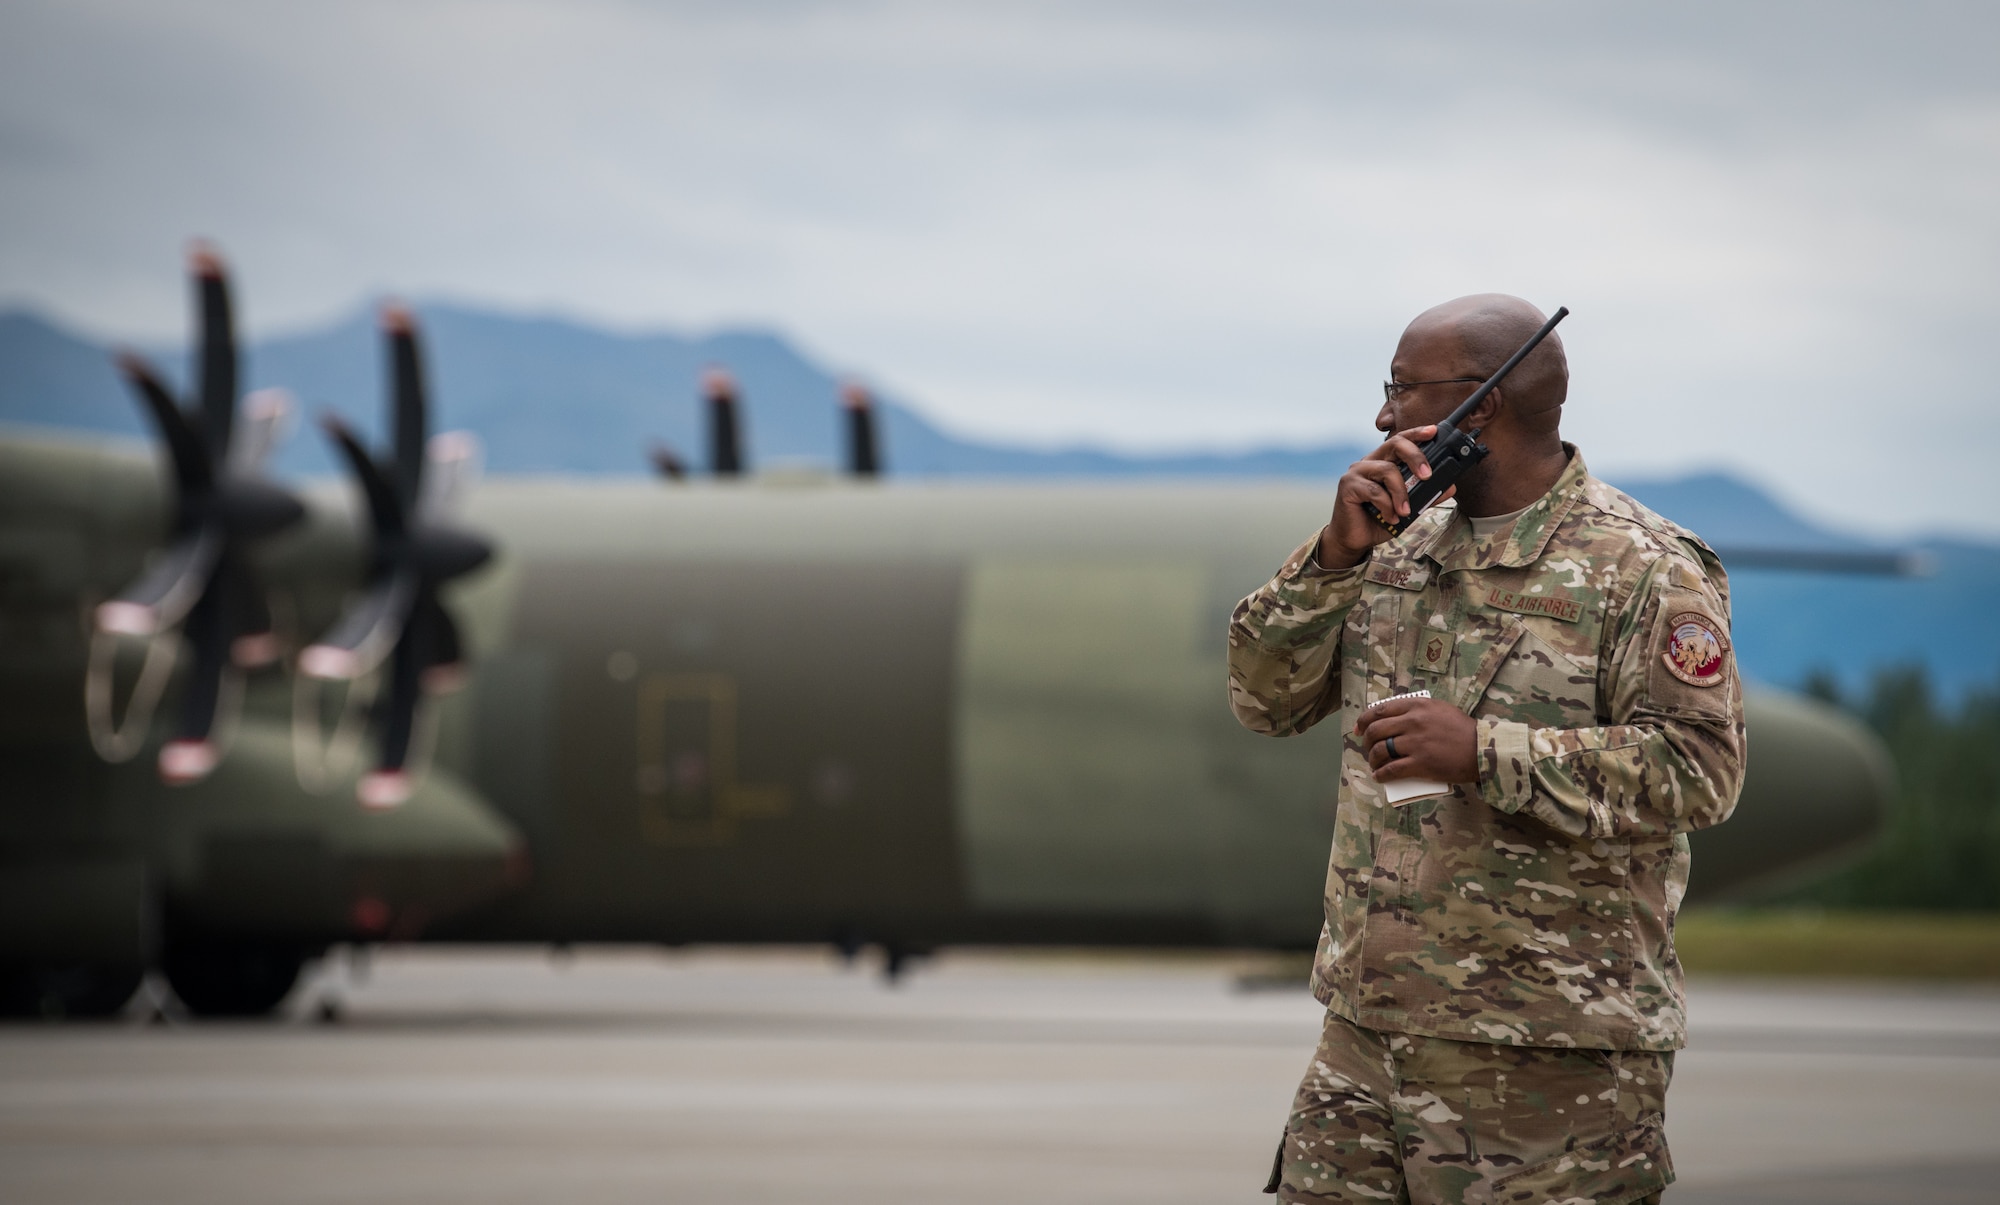 U.S. Air Force Master Sgt. Rick Moore, 353rd Special Operations Maintenance Squadron productions superintendent, speaks on a walkie-talkie at Joint Base Elmendorf-Richardson, Alaska, Aug. 13, 2018. In addition to U.S. Air Force Airmen, counterparts from Australia, Canada and the United Kingdom are also scheduled to participate, enabling the exchange of tactics, techniques and procedures while improving interoperability with fellow Airmen.